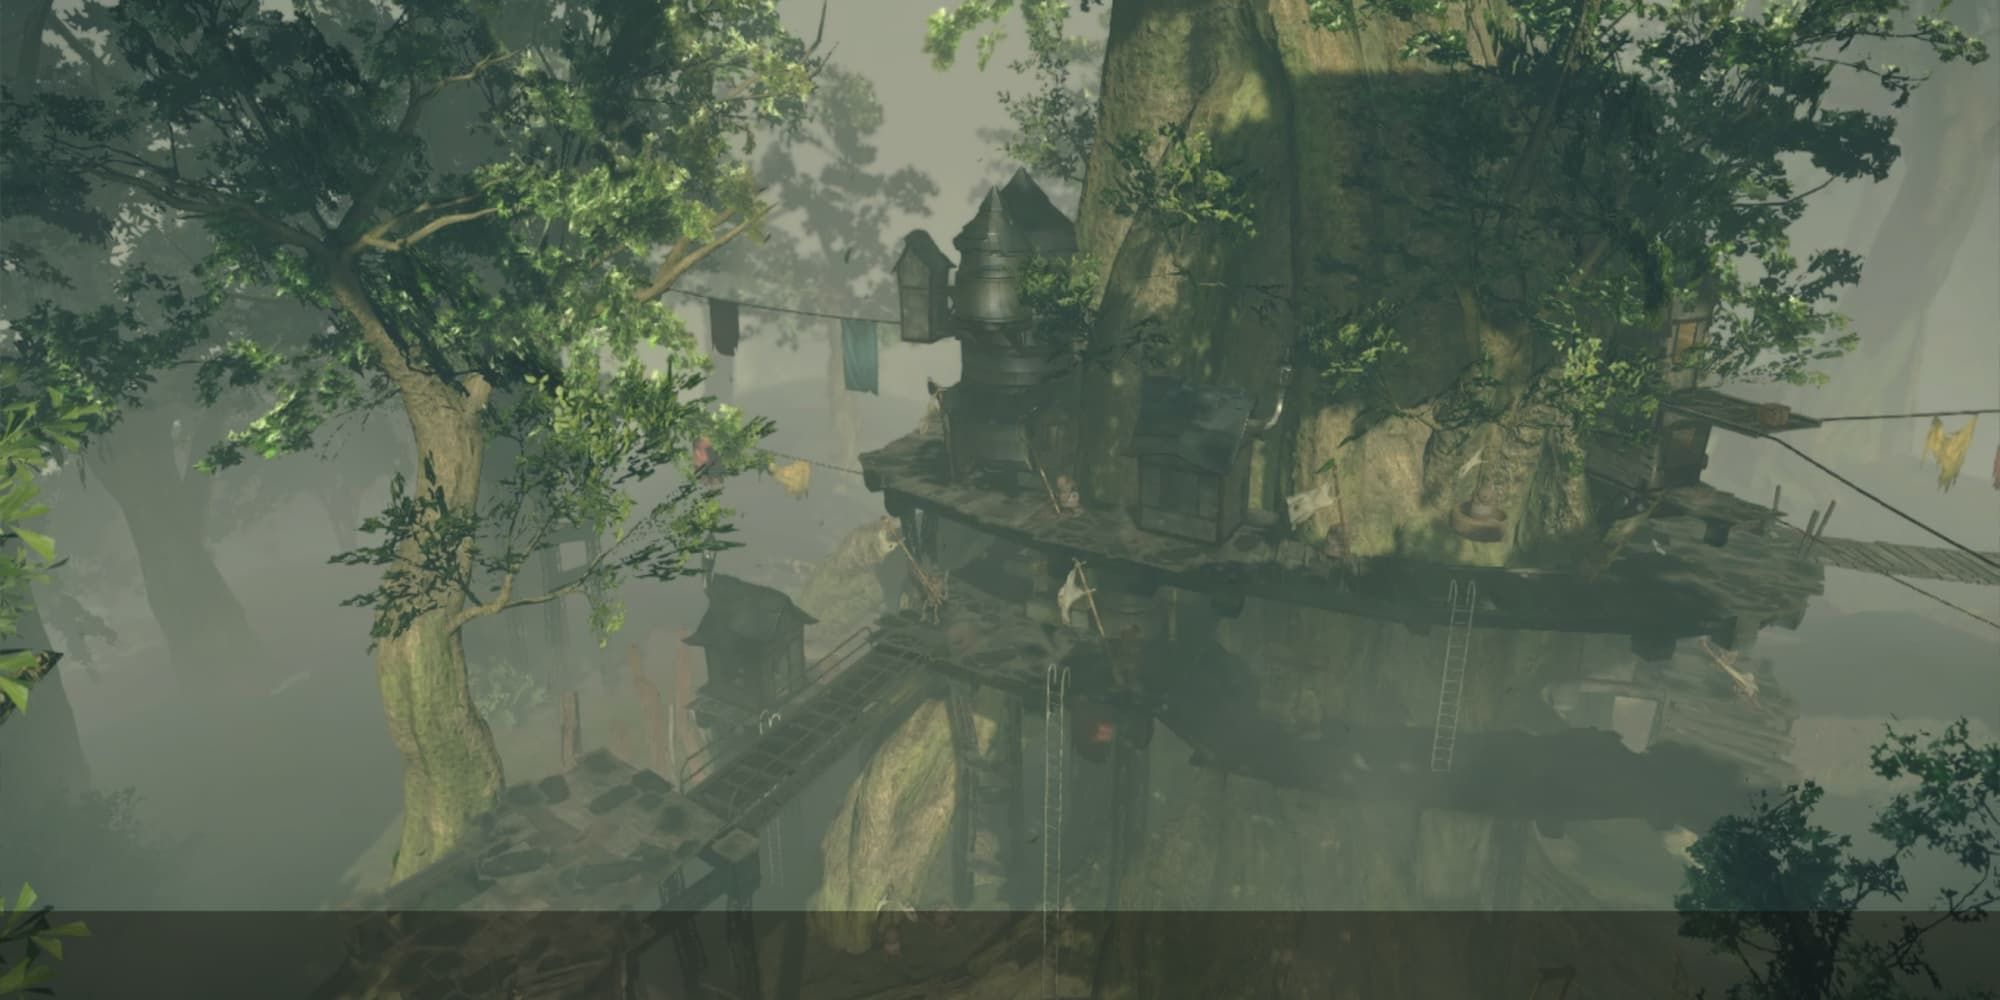 First shot of Pascal's village in Nier Automata